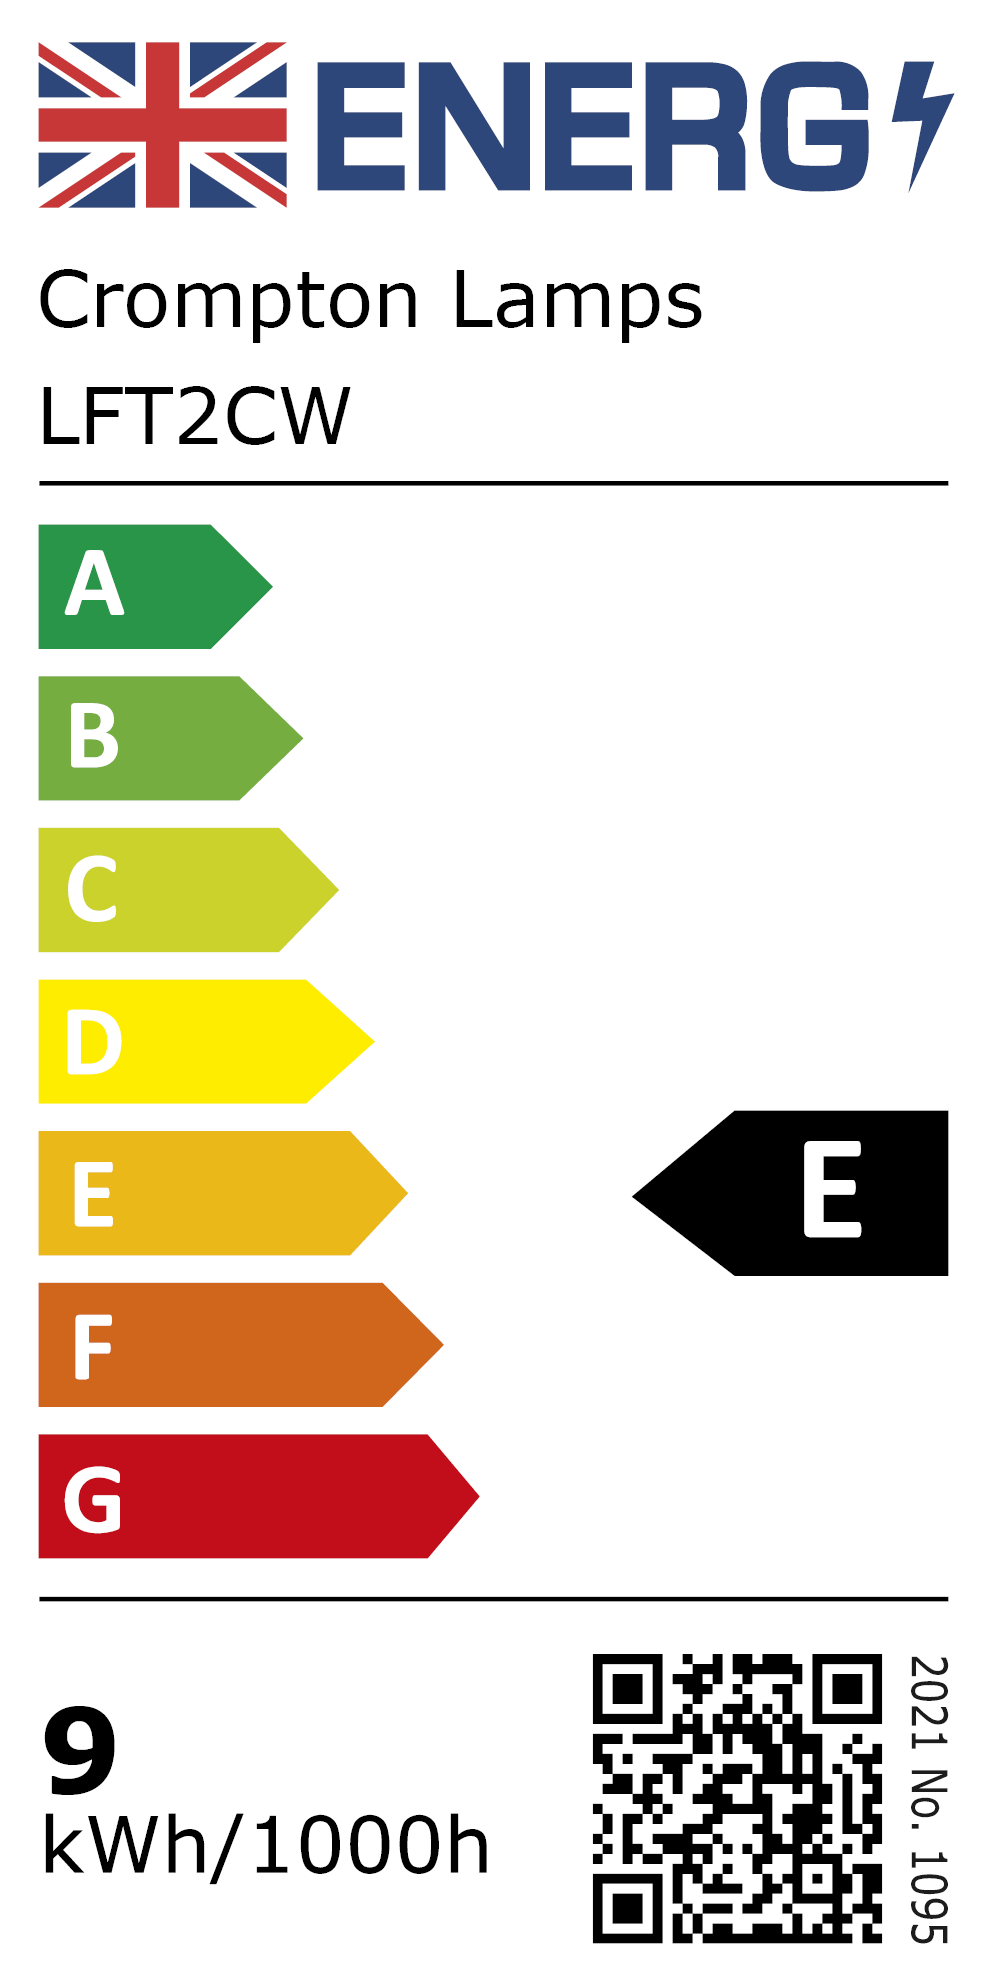 New 2021 Energy Rating Label: Stock Code LFT2CW